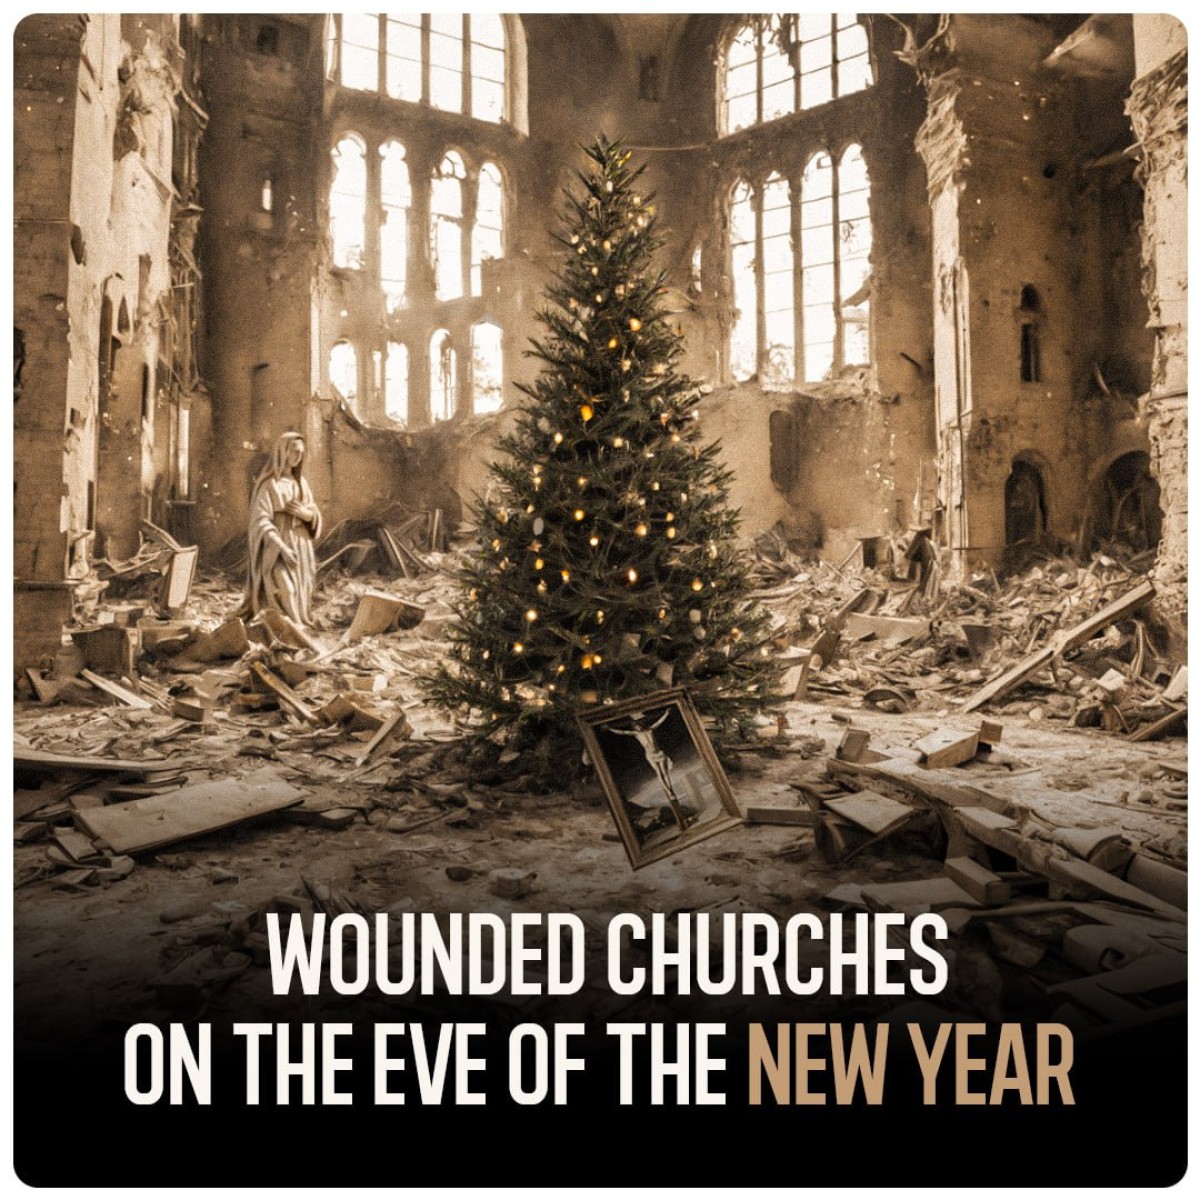 WOUNDED CHURCHES ON THE EVE OF THE NEW YEAR